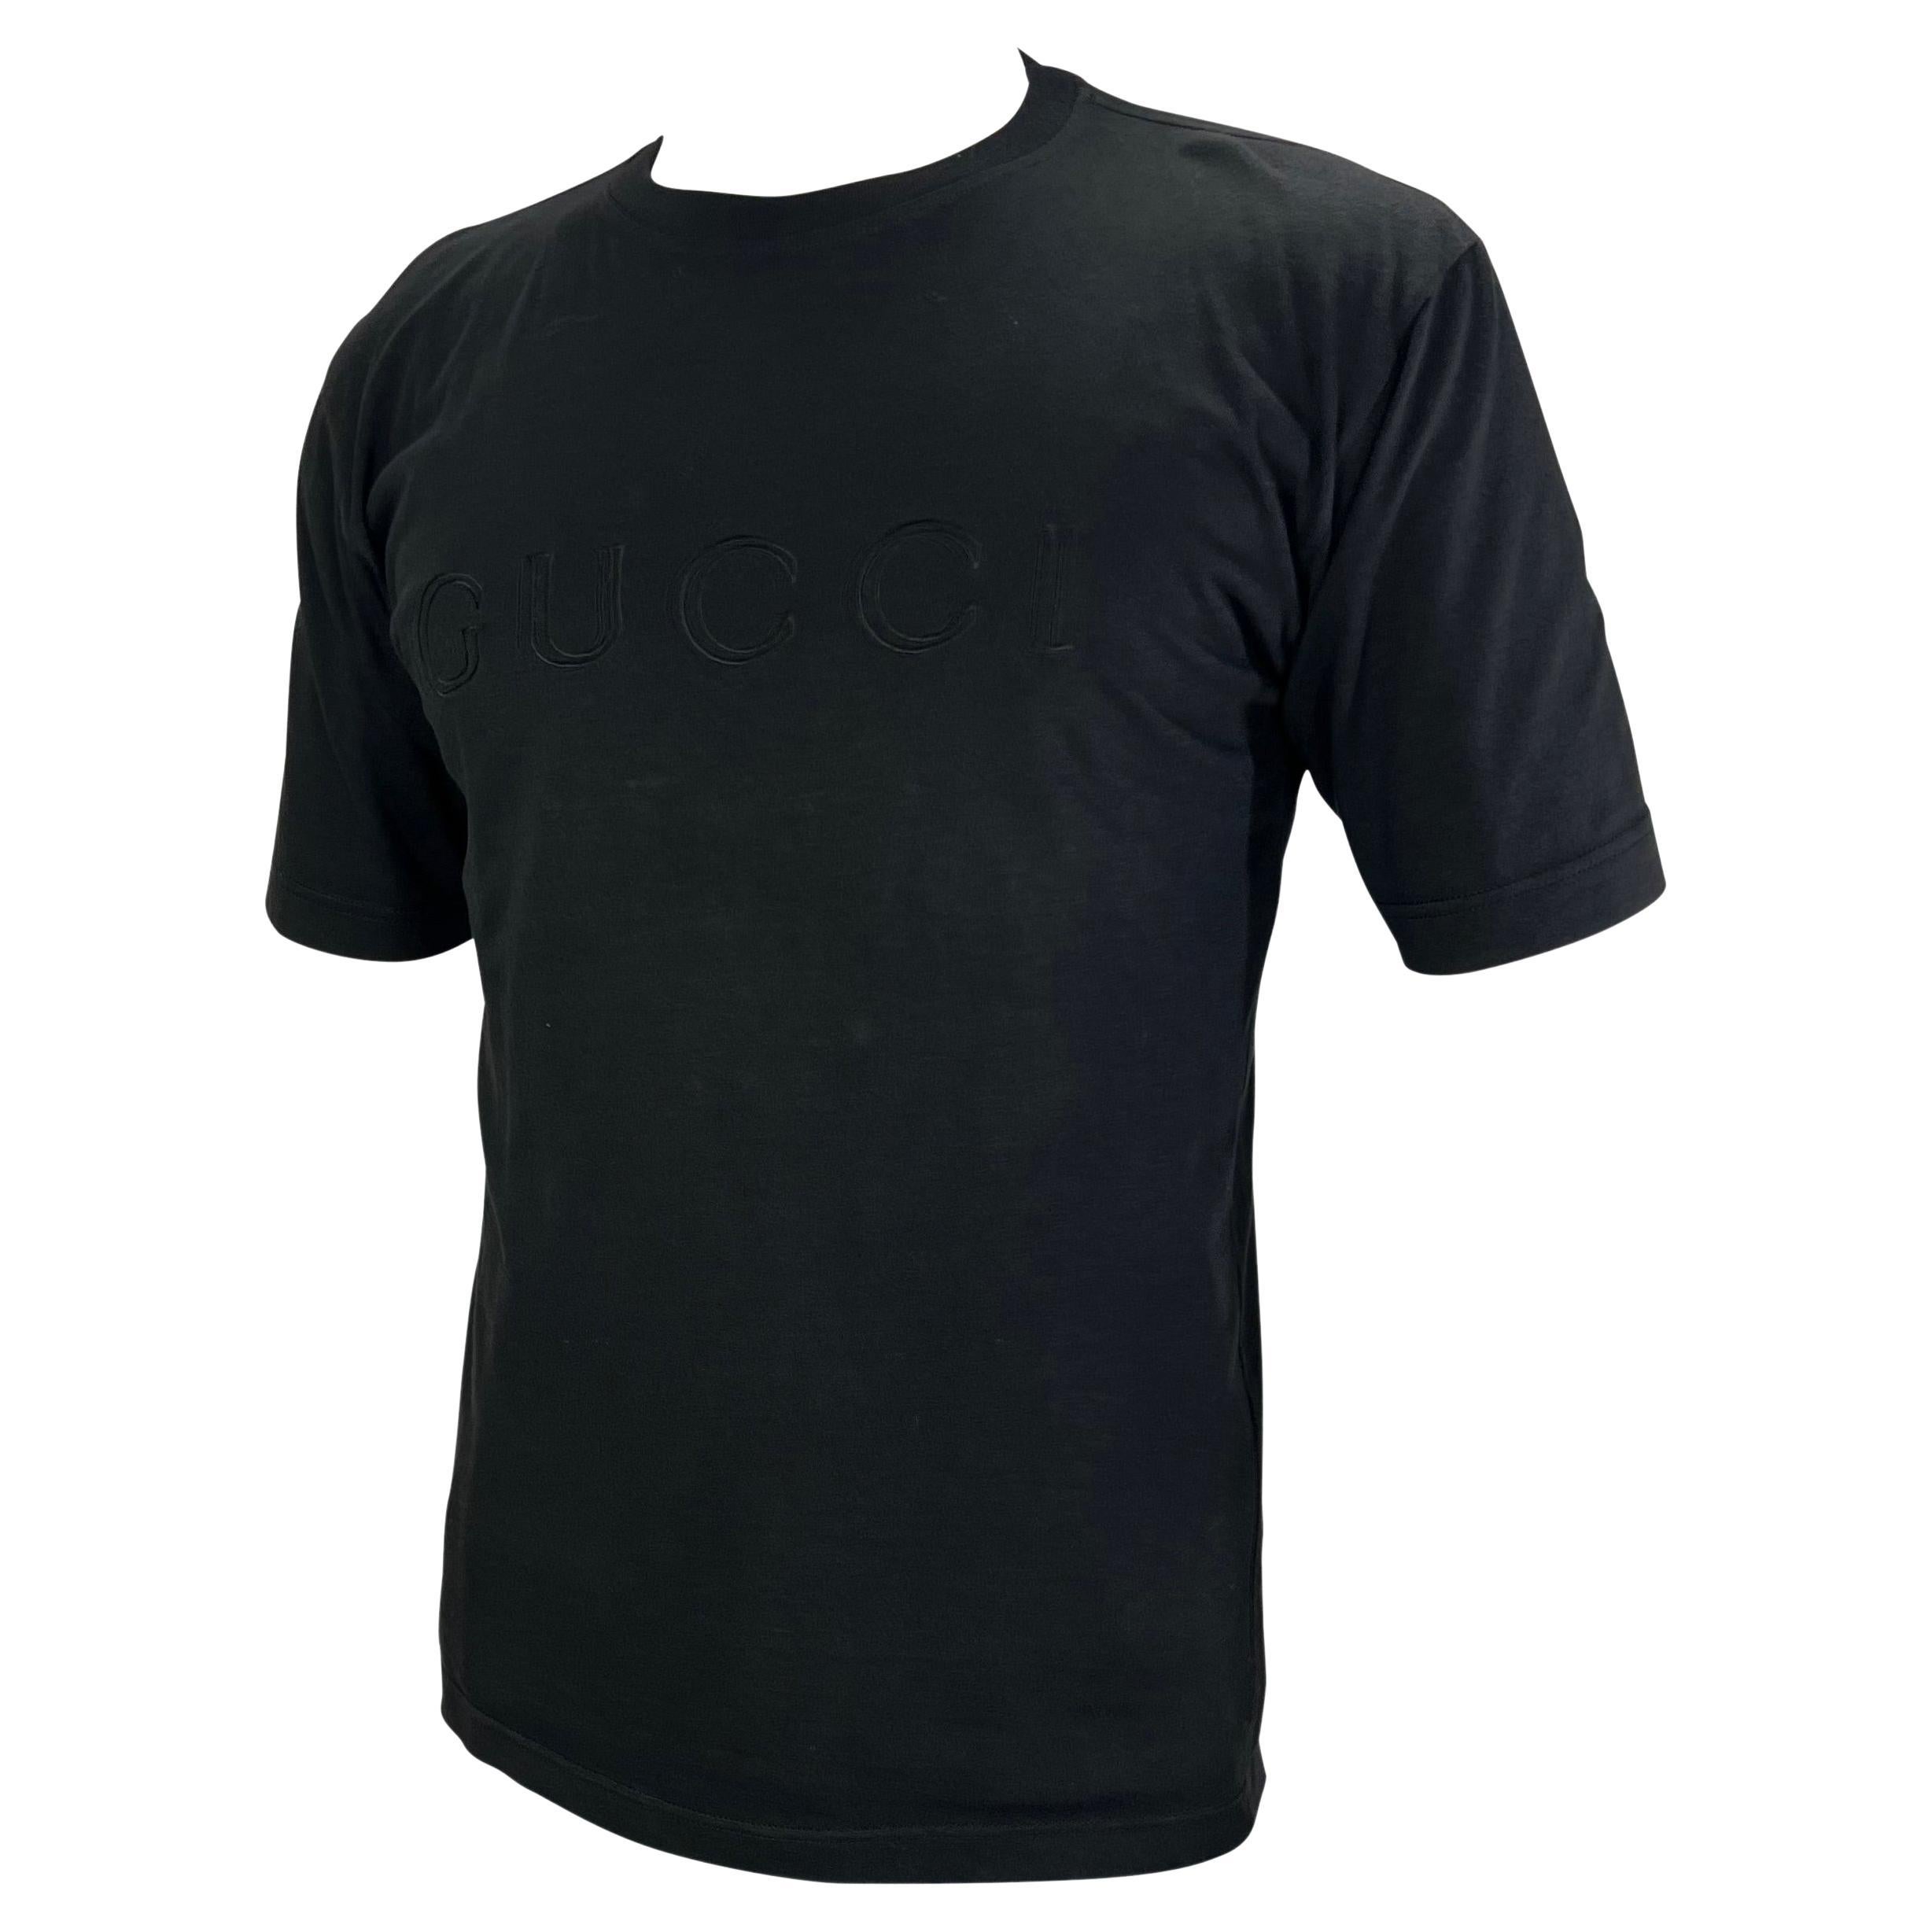 Presenting a black Gucci logo t-shirt, designed by Tom Ford. From 1996, this black t-shirt is perfectly elevated with Gucci spelled out on the chest. This must-have Gucci by Tom Ford shirt is the perfect piece to amp up your look. 

Approximate